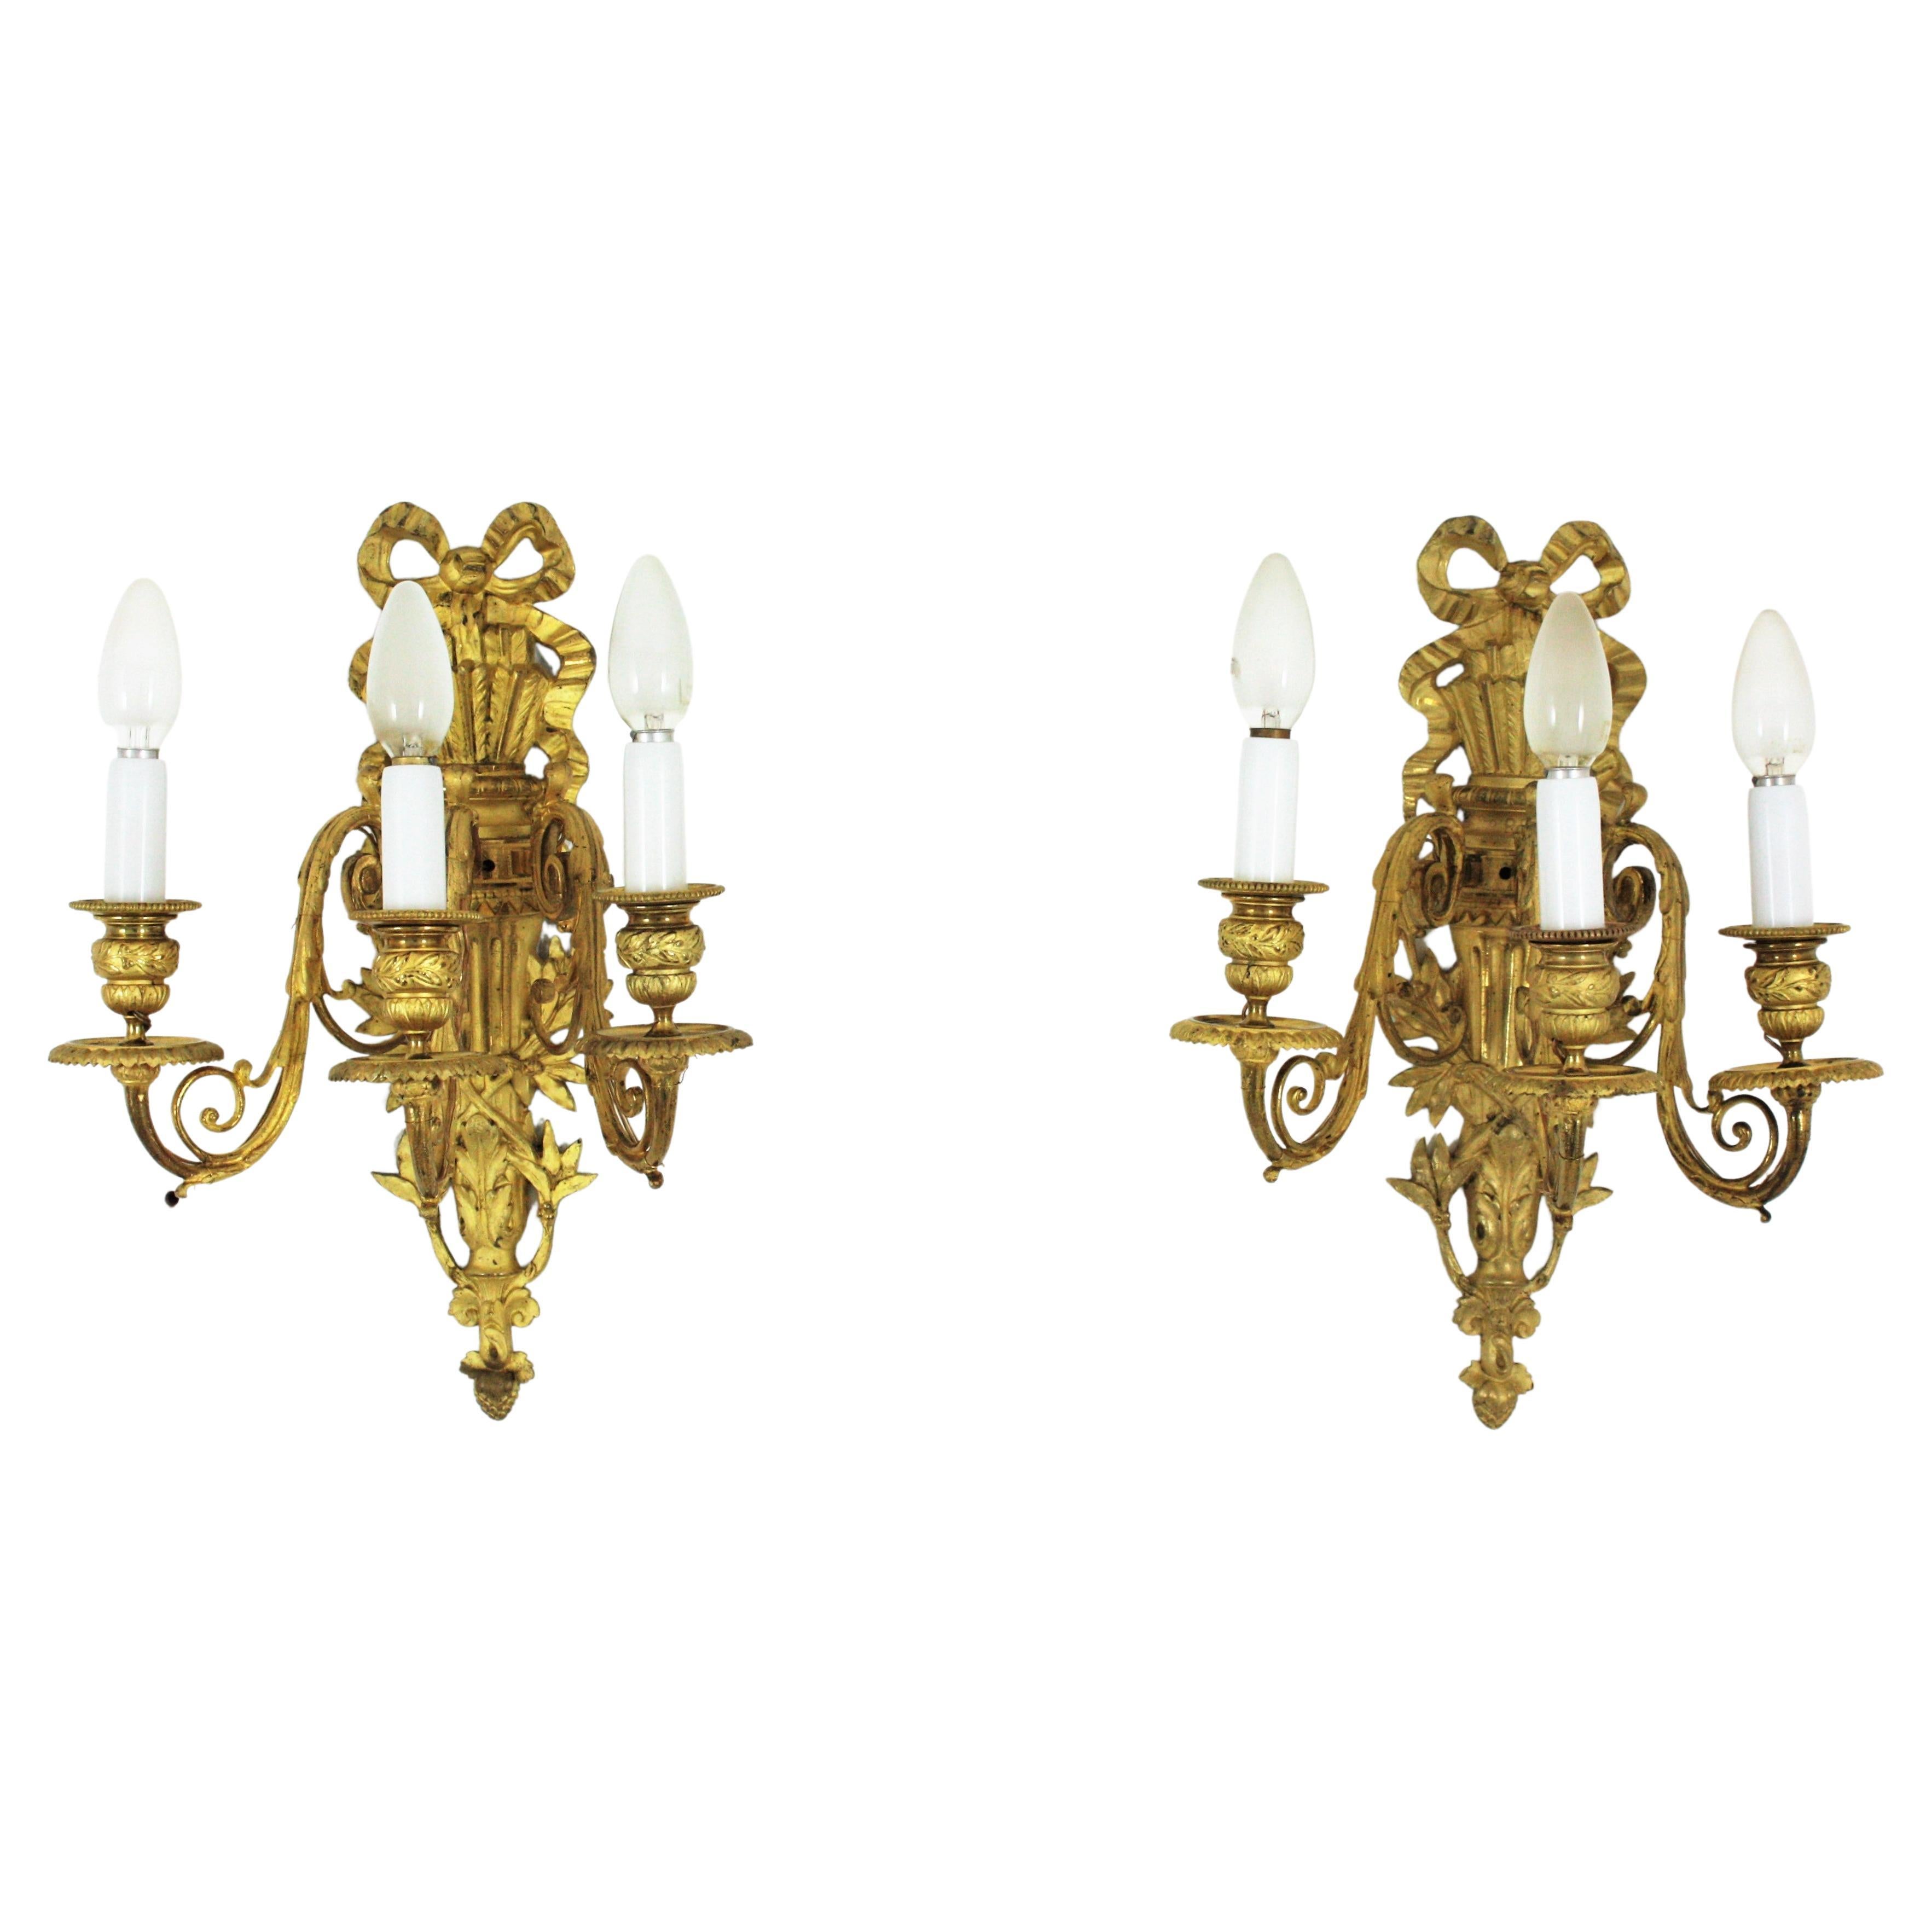 Pair of French Louis XVI Style Sconces in Ormolu